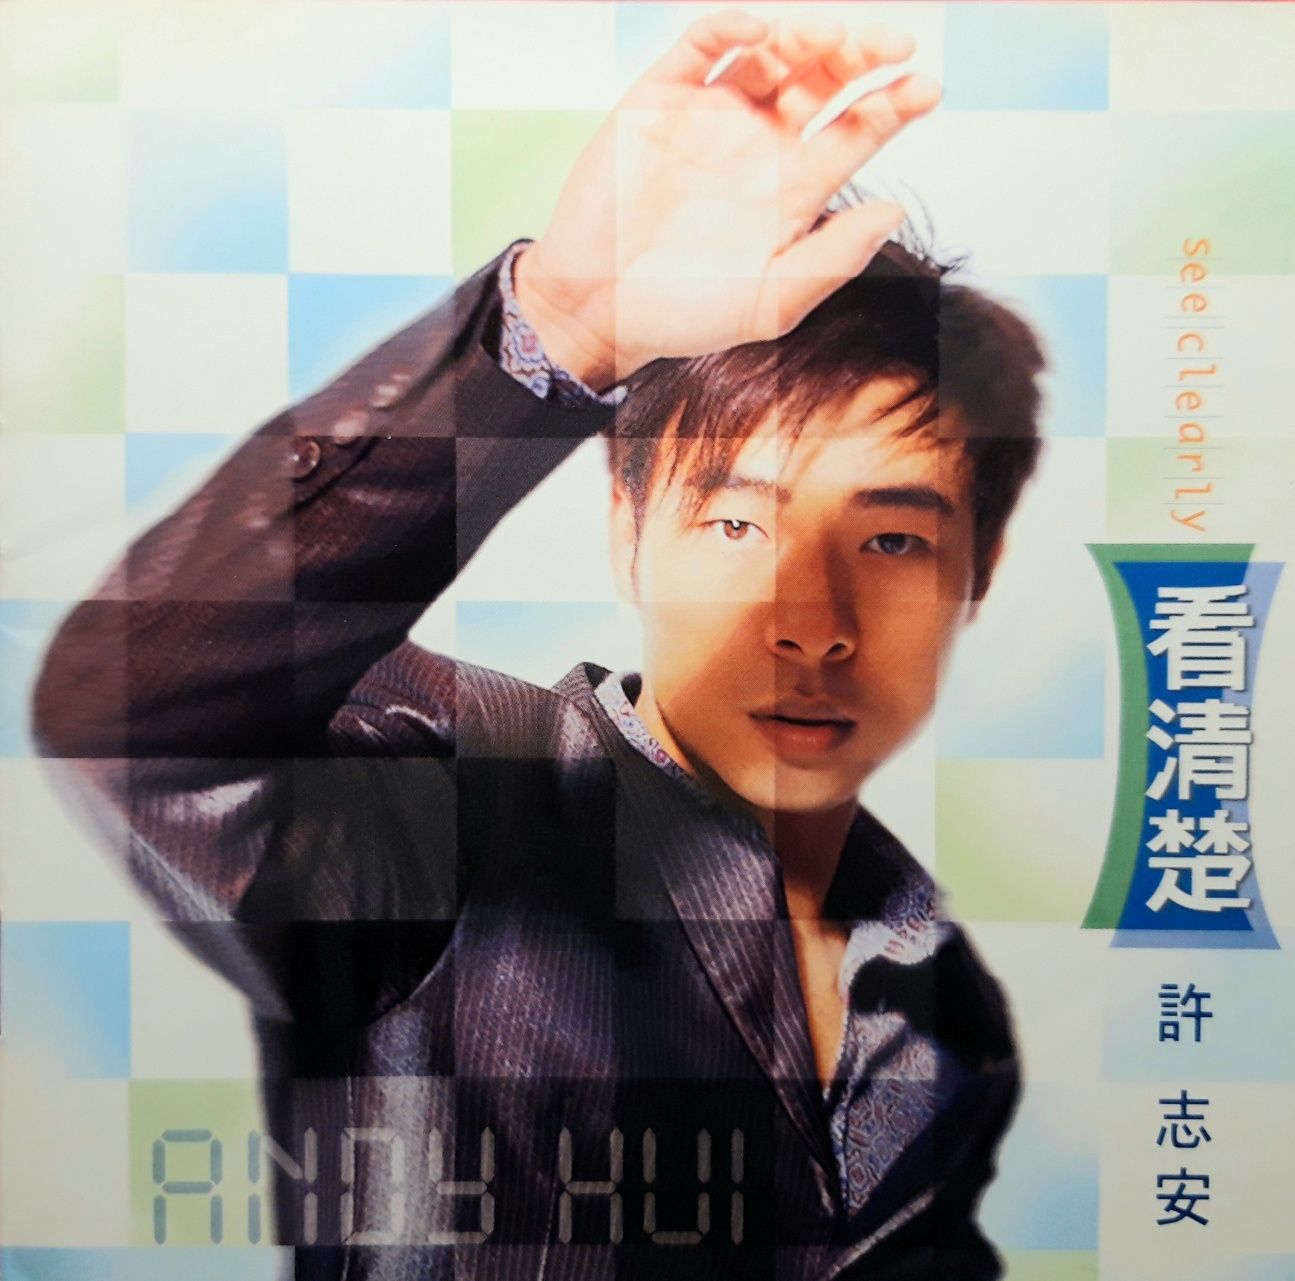 Andy Hui 許志安 - See Clearly 看清楚 (CD, 1997)